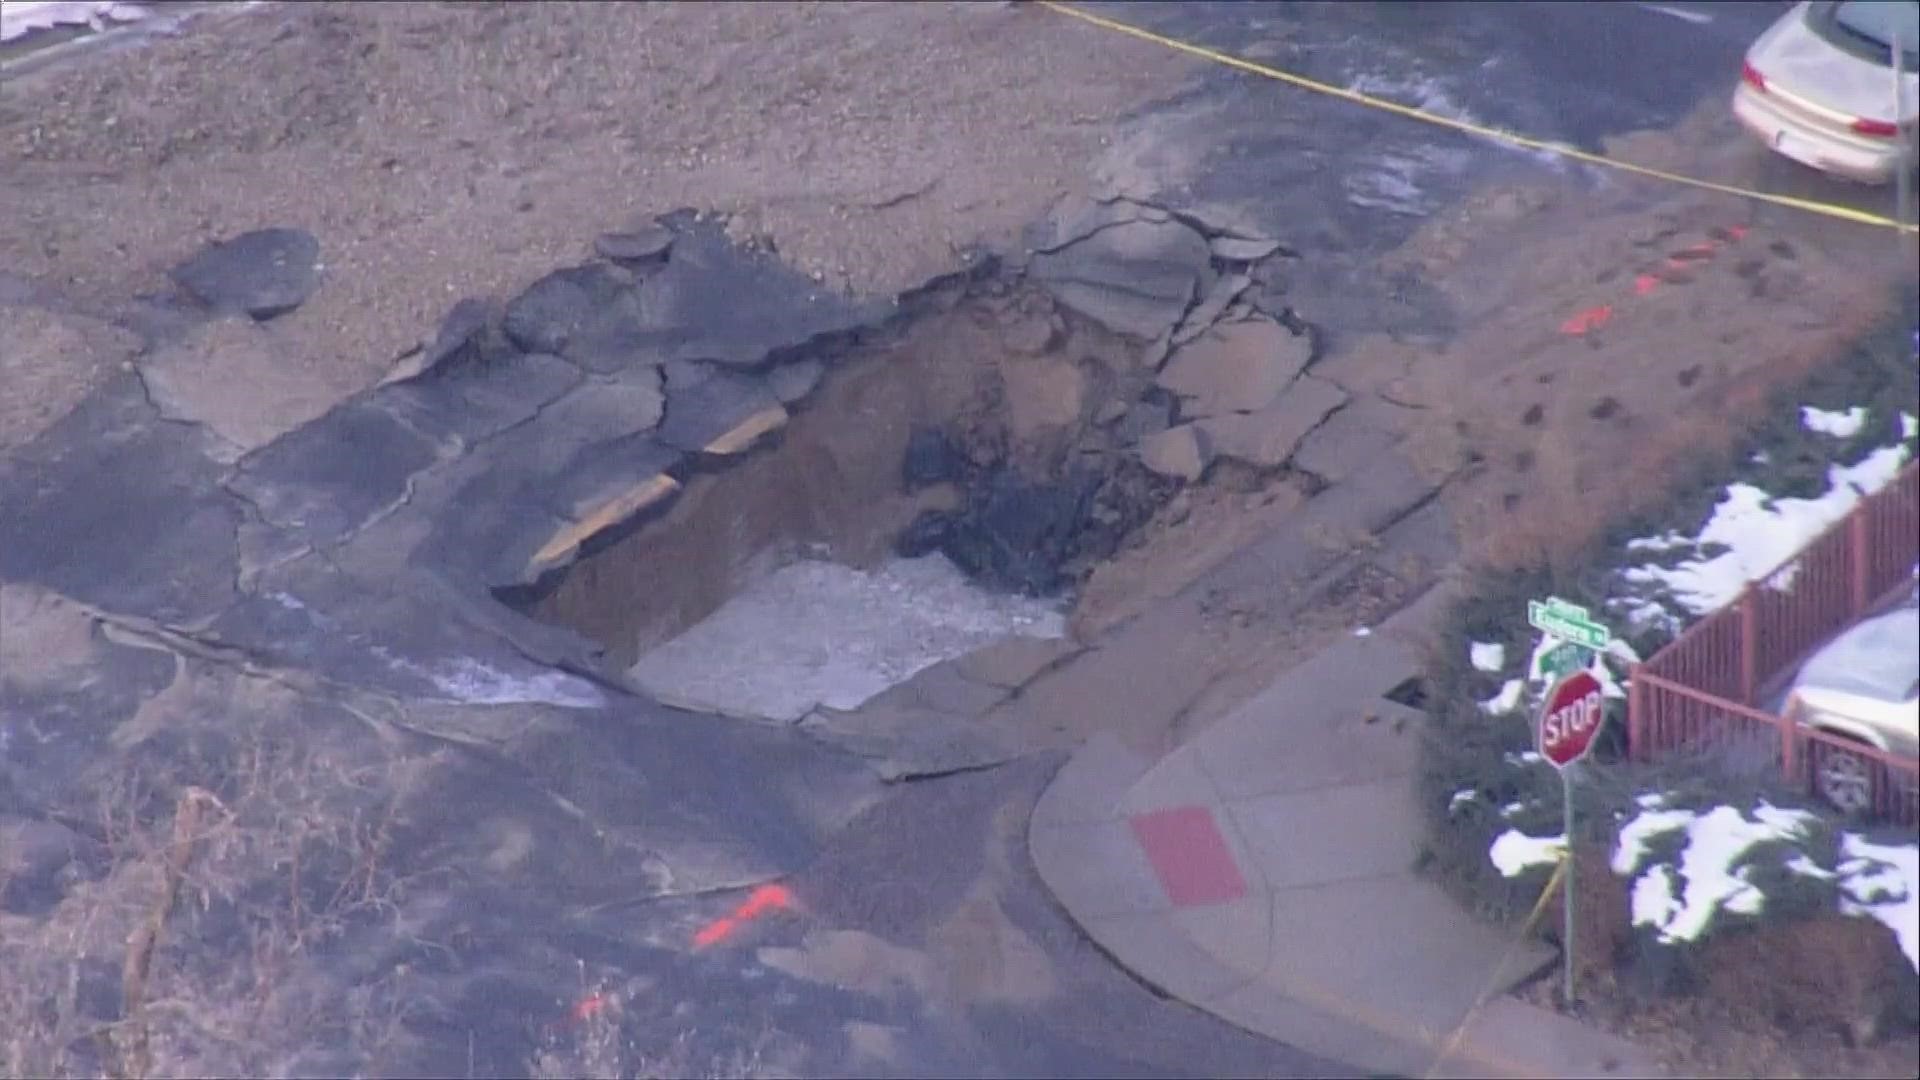 A large water main break at Eudora and 9th streets in Denver overnight led to a sinkhole opening up in the road.